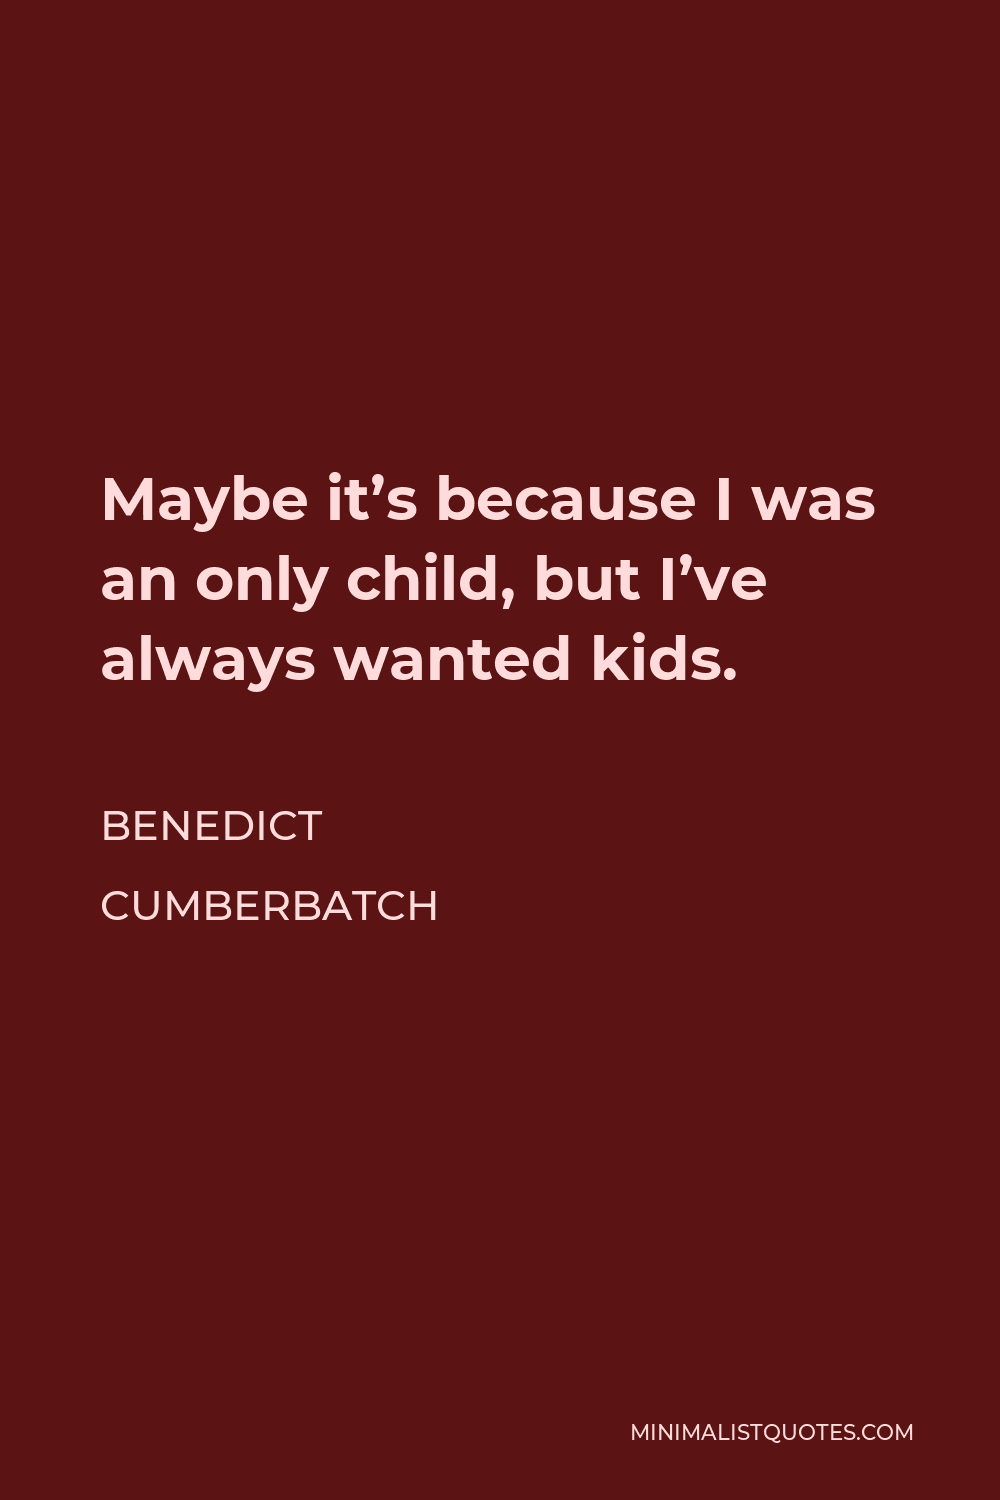 Benedict Cumberbatch Quote - Maybe it’s because I was an only child, but I’ve always wanted kids.